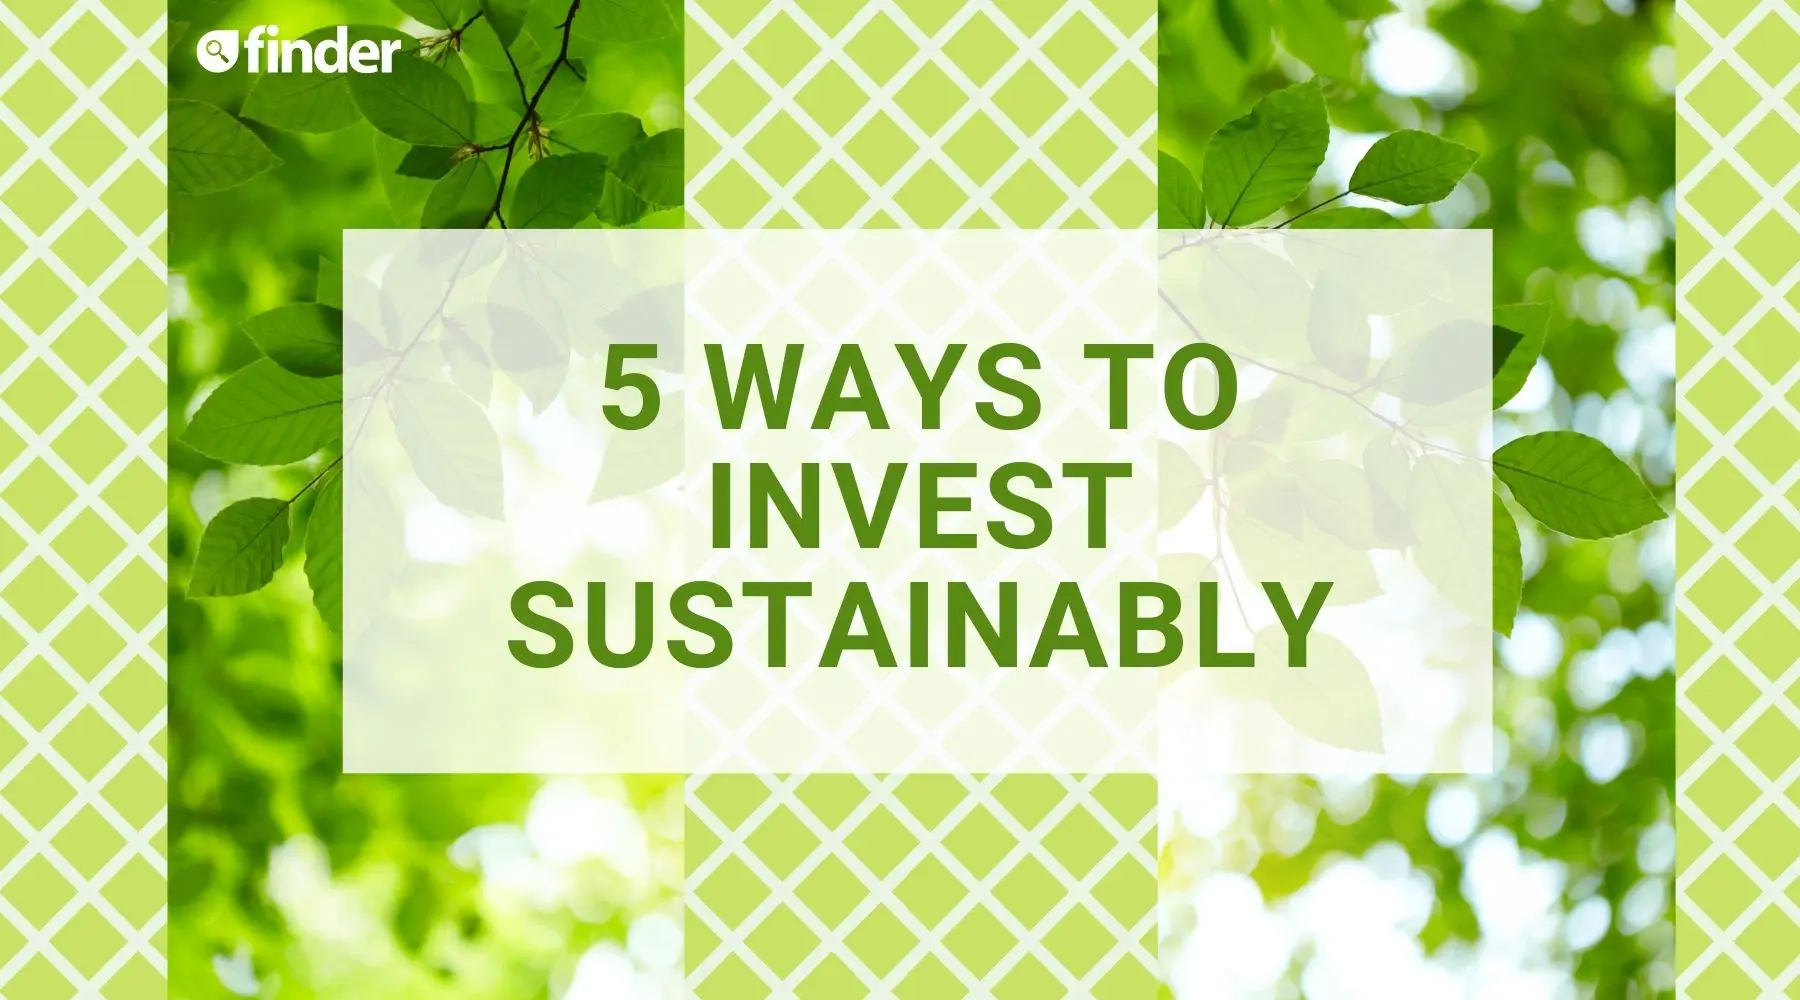 5 ways to invest sustainably